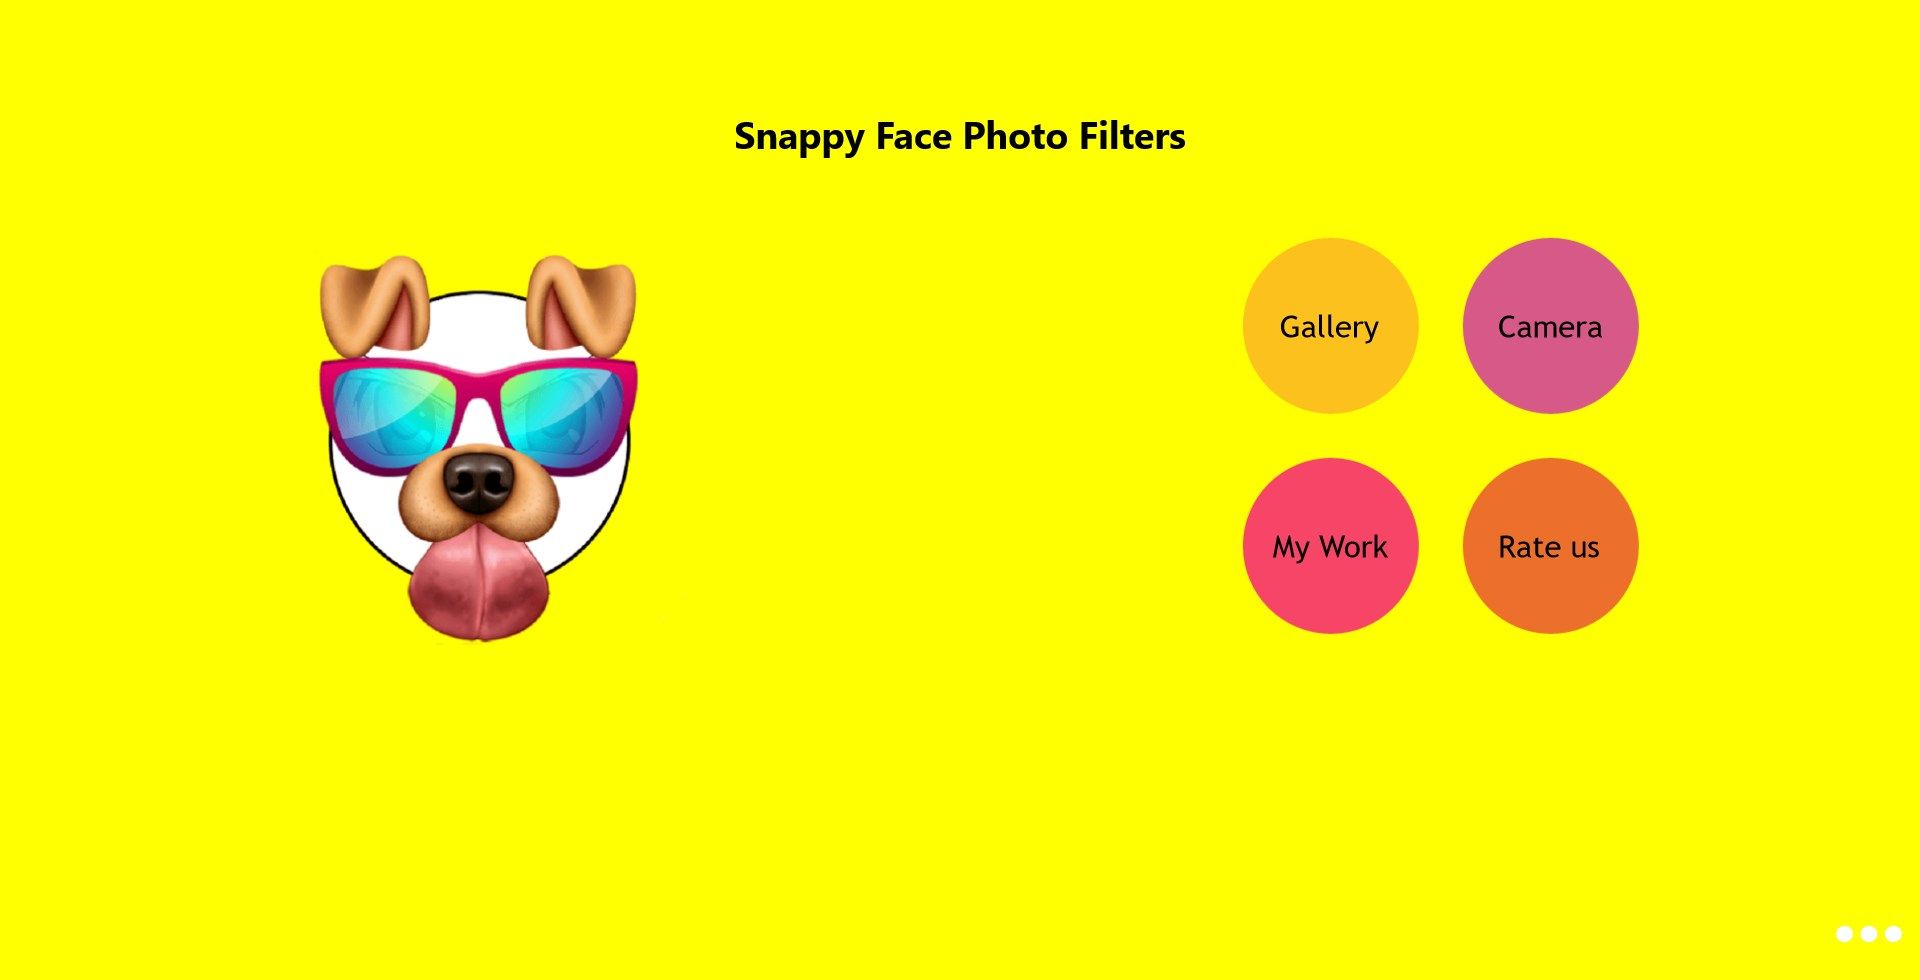 Snappy Face Photo Filters